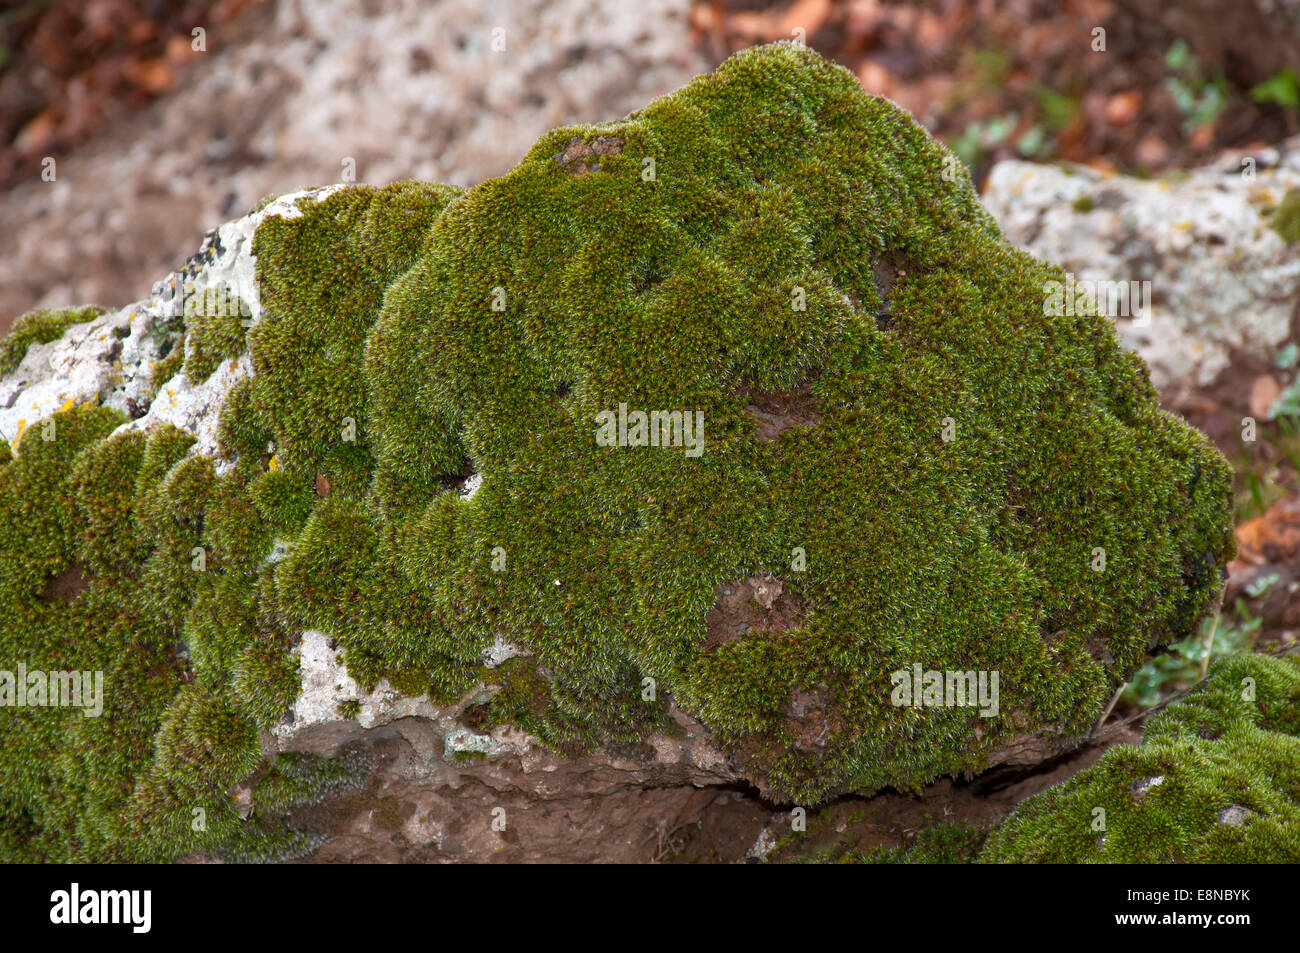 Moss covering a rock Stock Photo